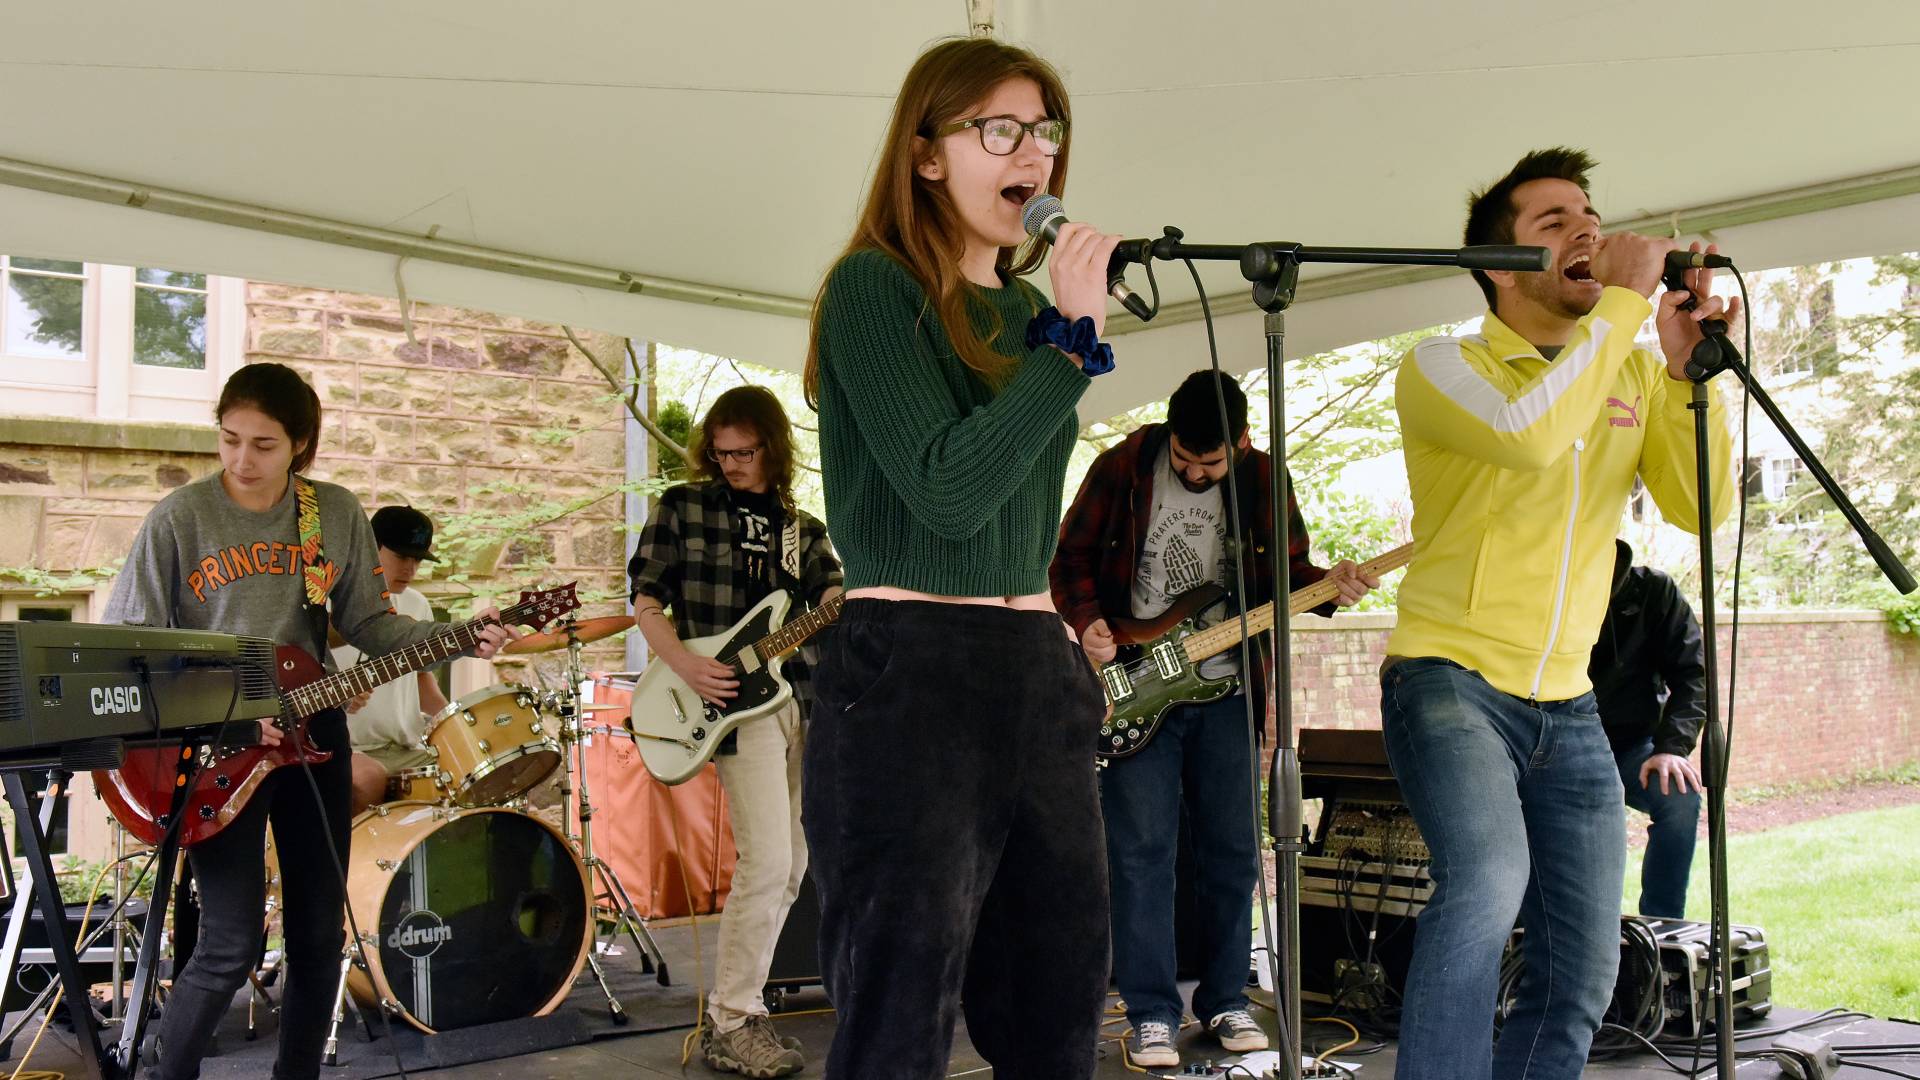 Young woman and a young man sing into microphones while a rock band play behind them